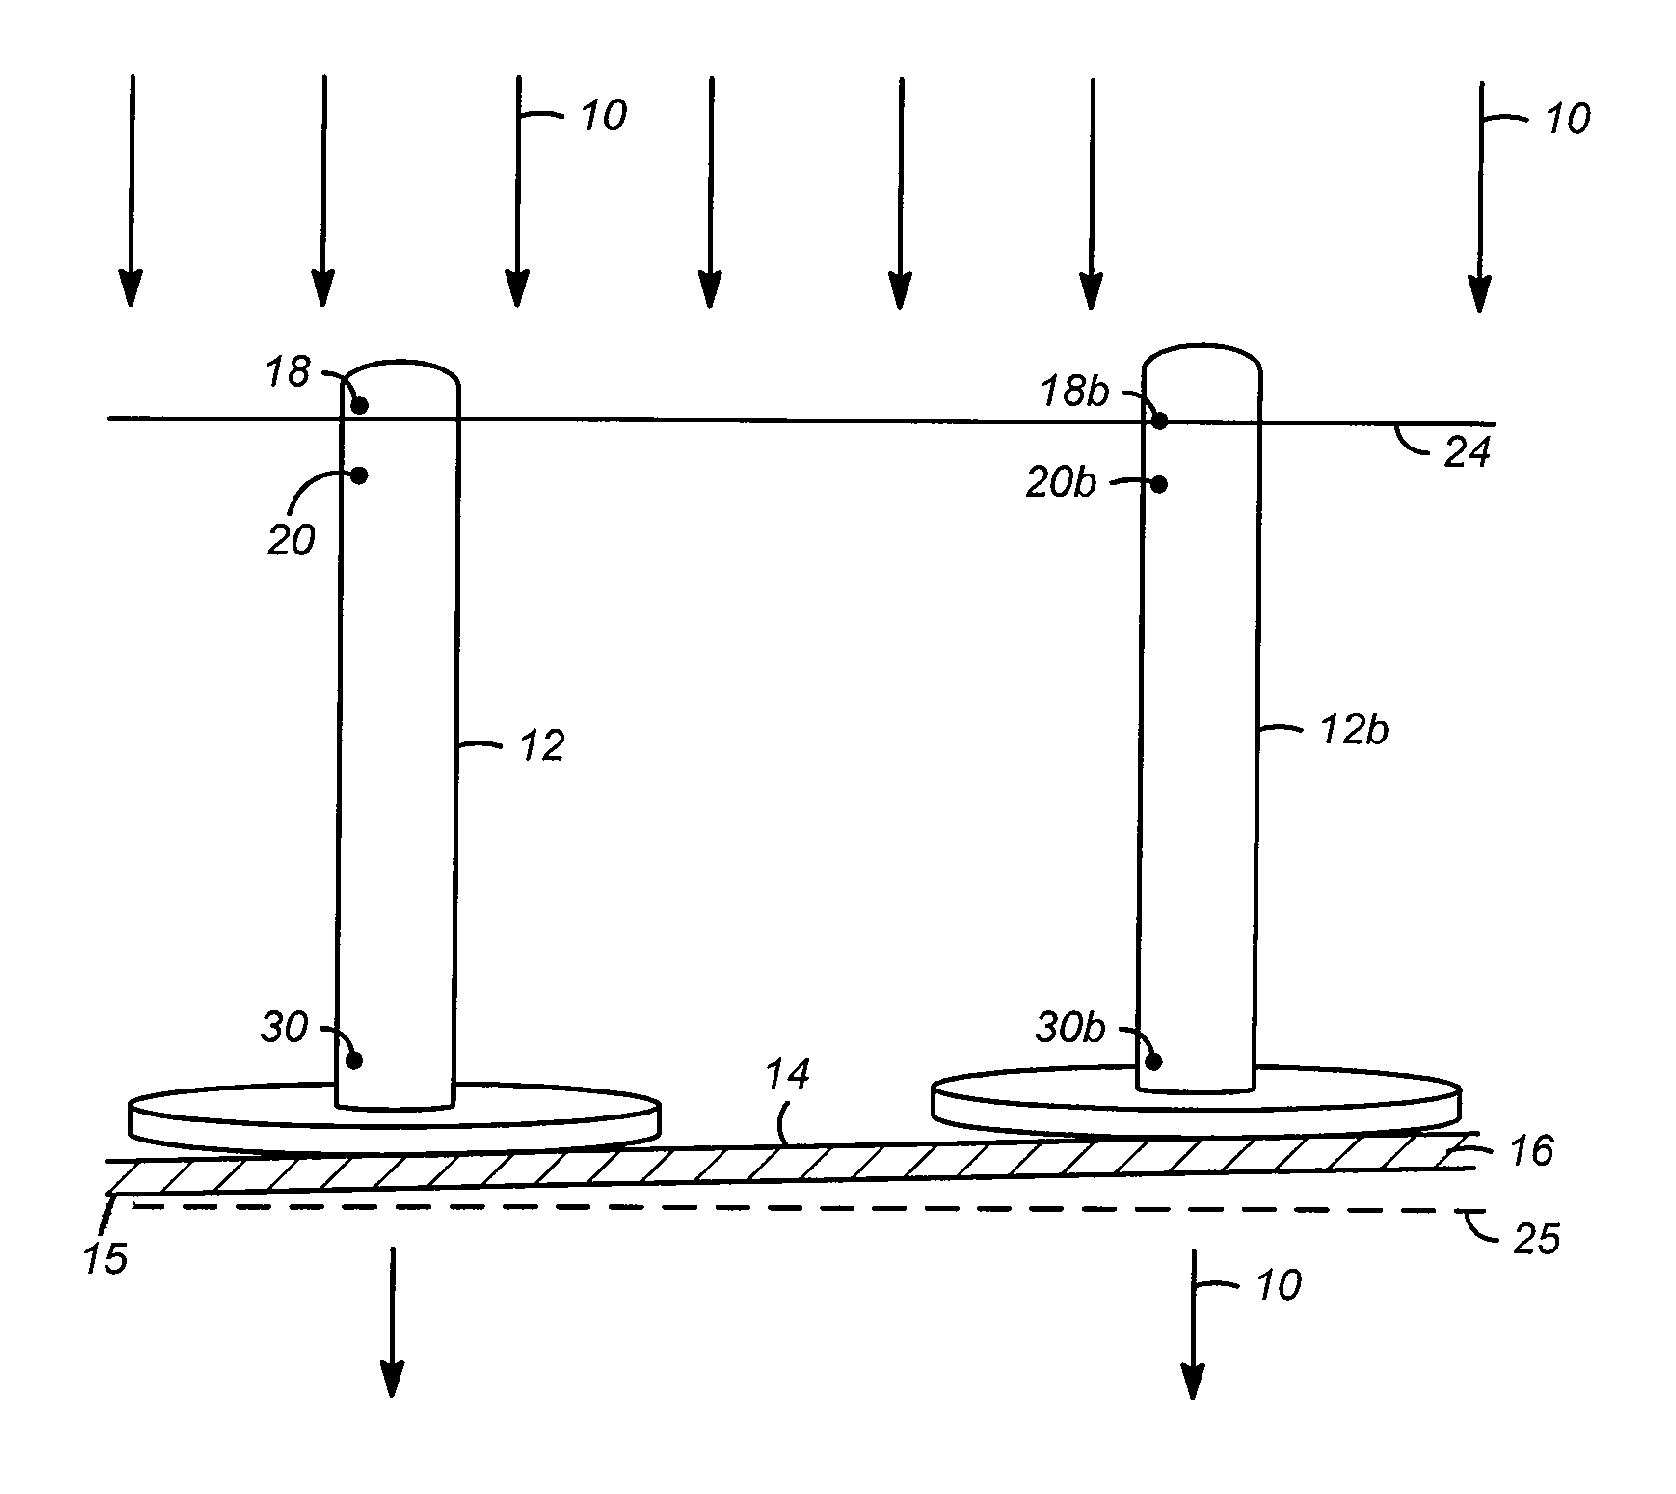 Apparatus and process for distributing vapor and liquid phases